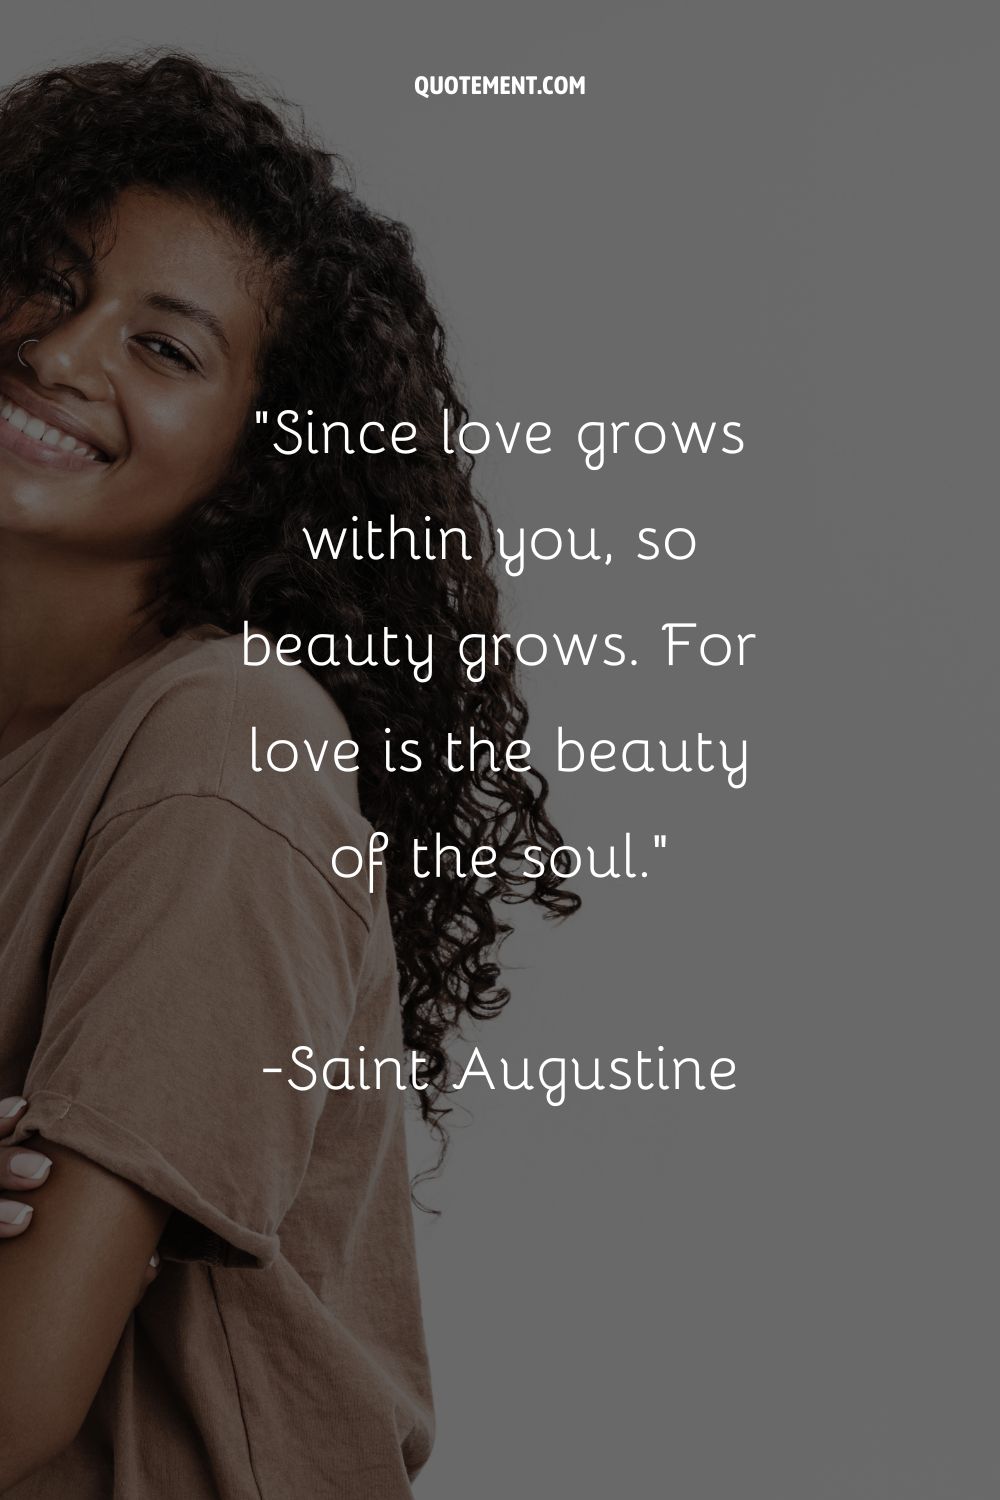 Since love grows within you, so beauty grows. For love is the beauty of the soul